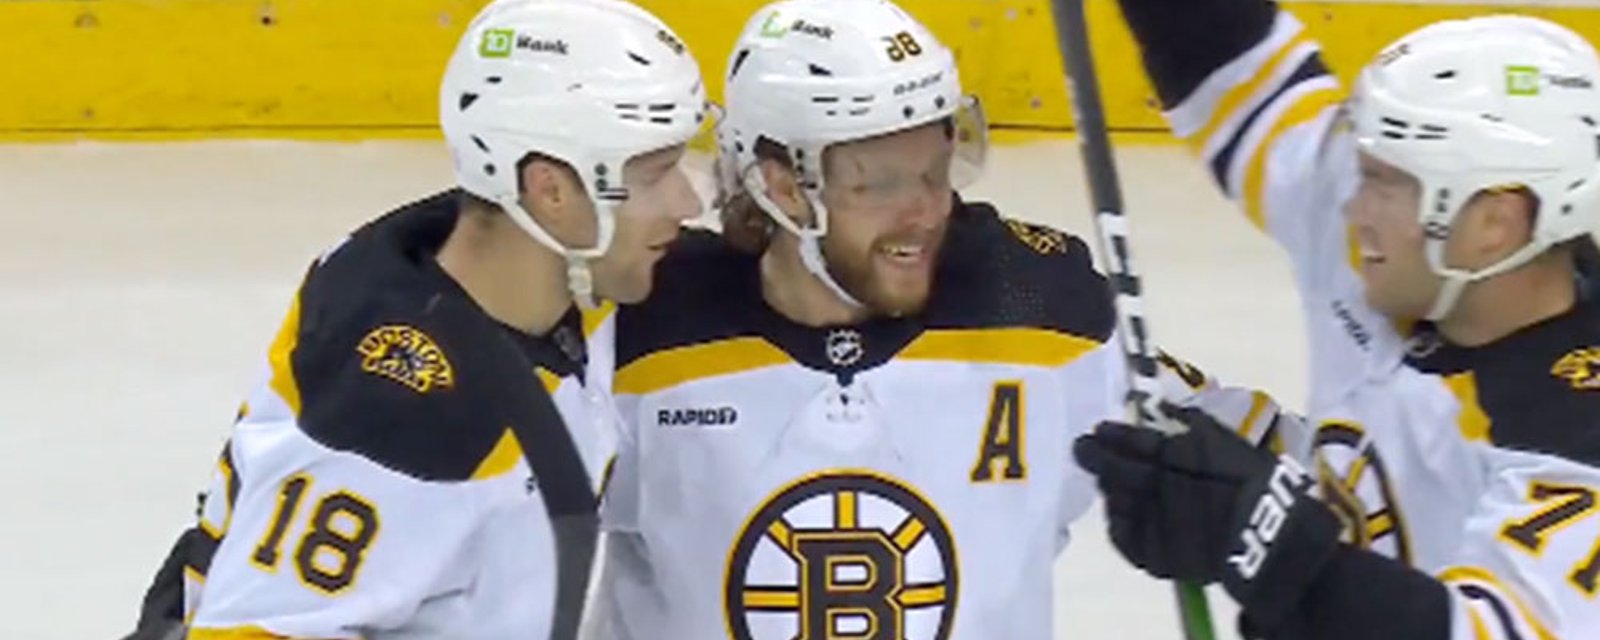 Pastrnak scores a ridiculous goal to open the scoring against Rangers